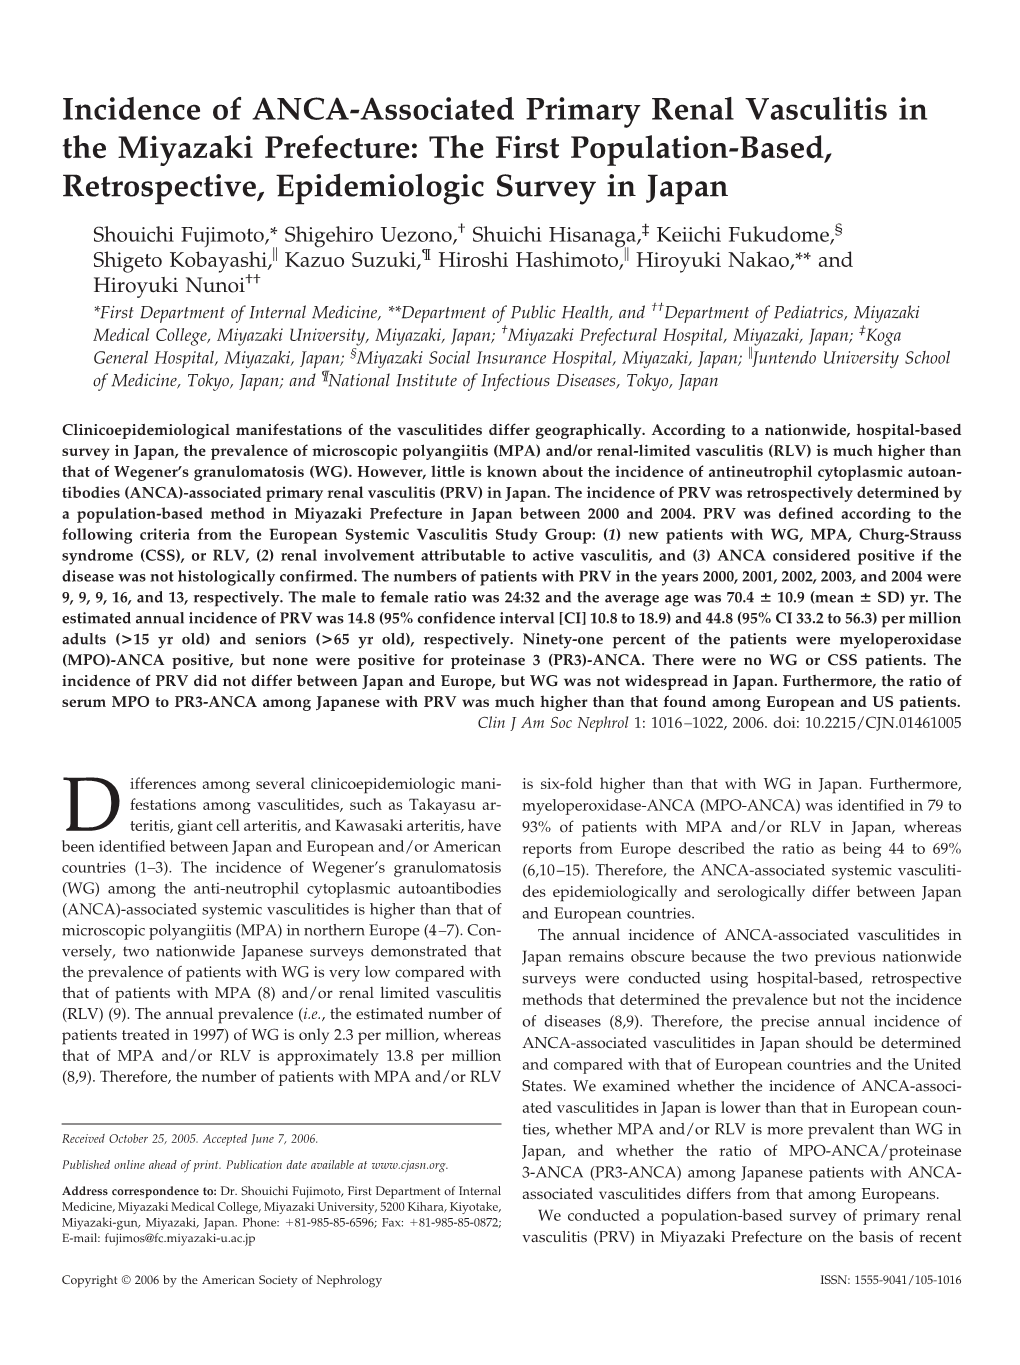 Incidence of ANCA-Associated Primary Renal Vasculitis in the Miyazaki Prefecture: the First Population-Based, Retrospective, Epidemiologic Survey in Japan